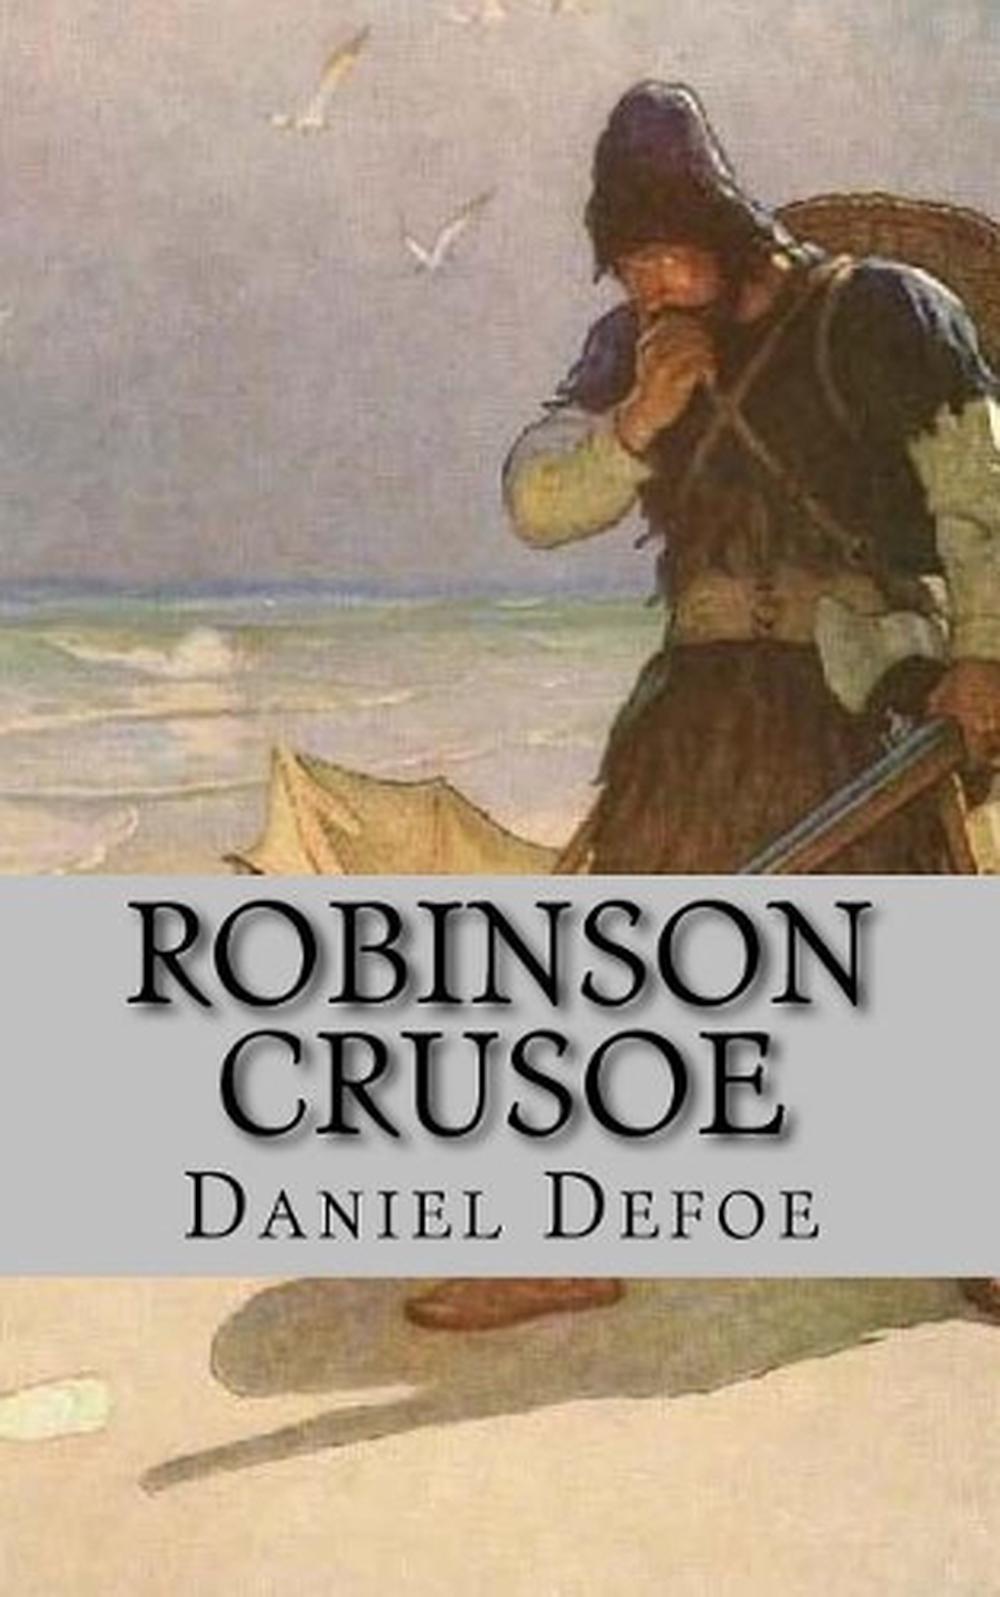 book review of robinson crusoe